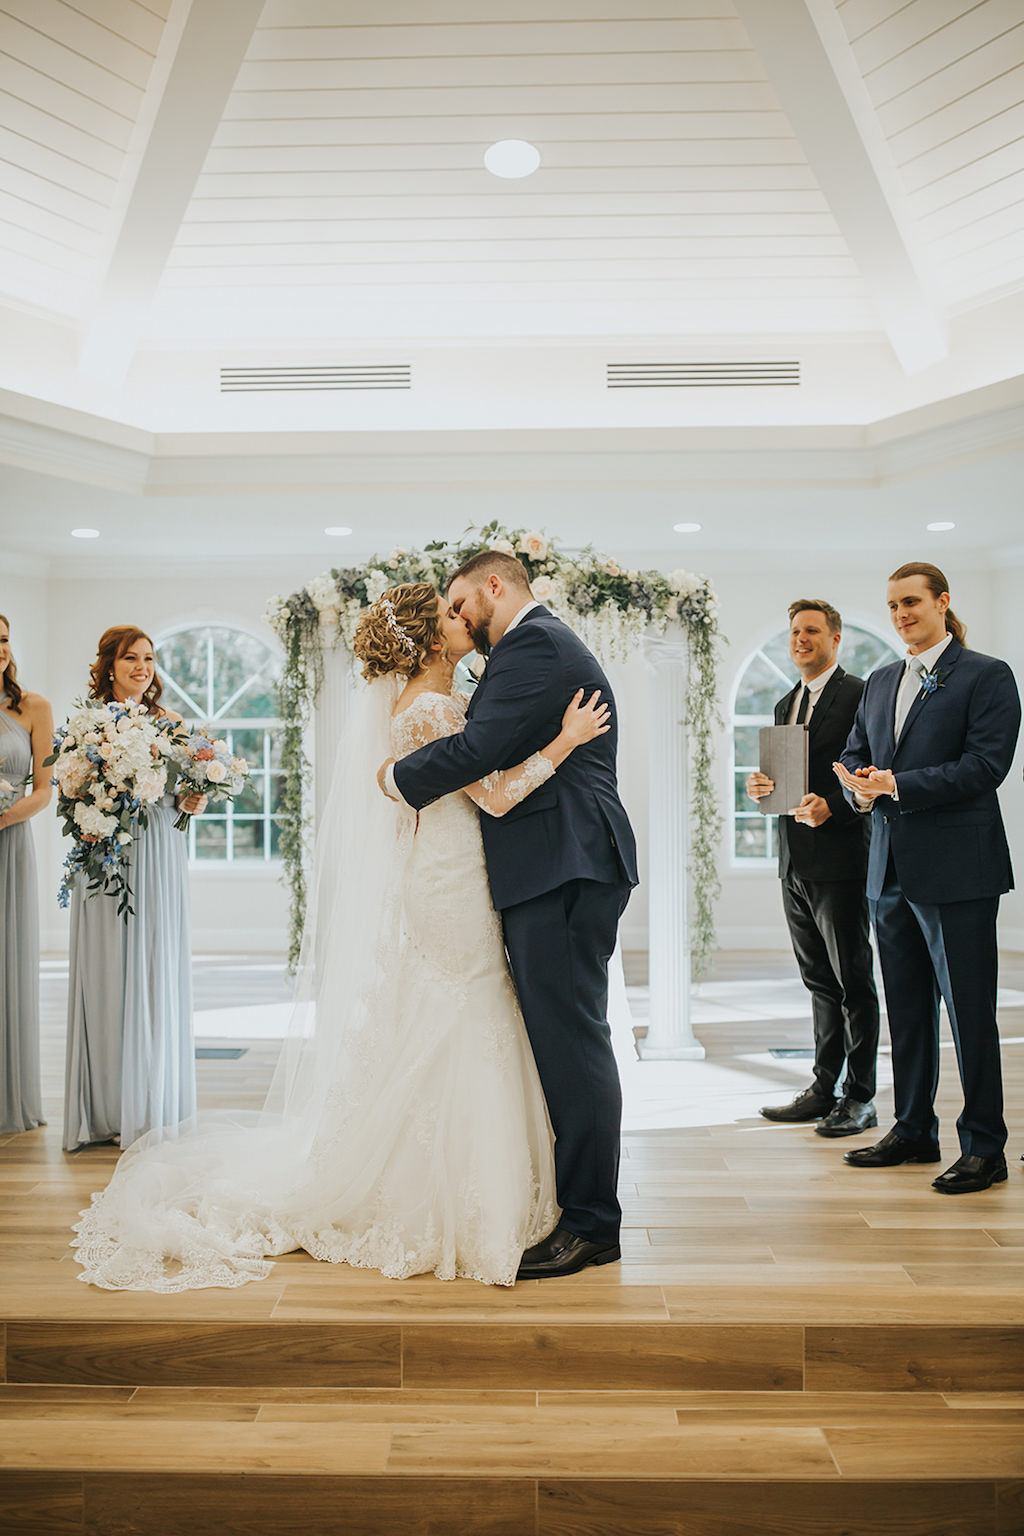 Wedding Ceremony Portrait, Groomsmen Wearing Navy Blue Suits with Blue Flower Boutonniere, Bridesmaids Wearing Silver/Grey Dresses with White and Greenery Bouquets, Bride Wearing White Lace Wedding Dress with Cathedral Length Lace and Tulle Veil and Groom Wearing Navy Blue Suit | Safety Harbor Wedding Venue Harborside Chapel